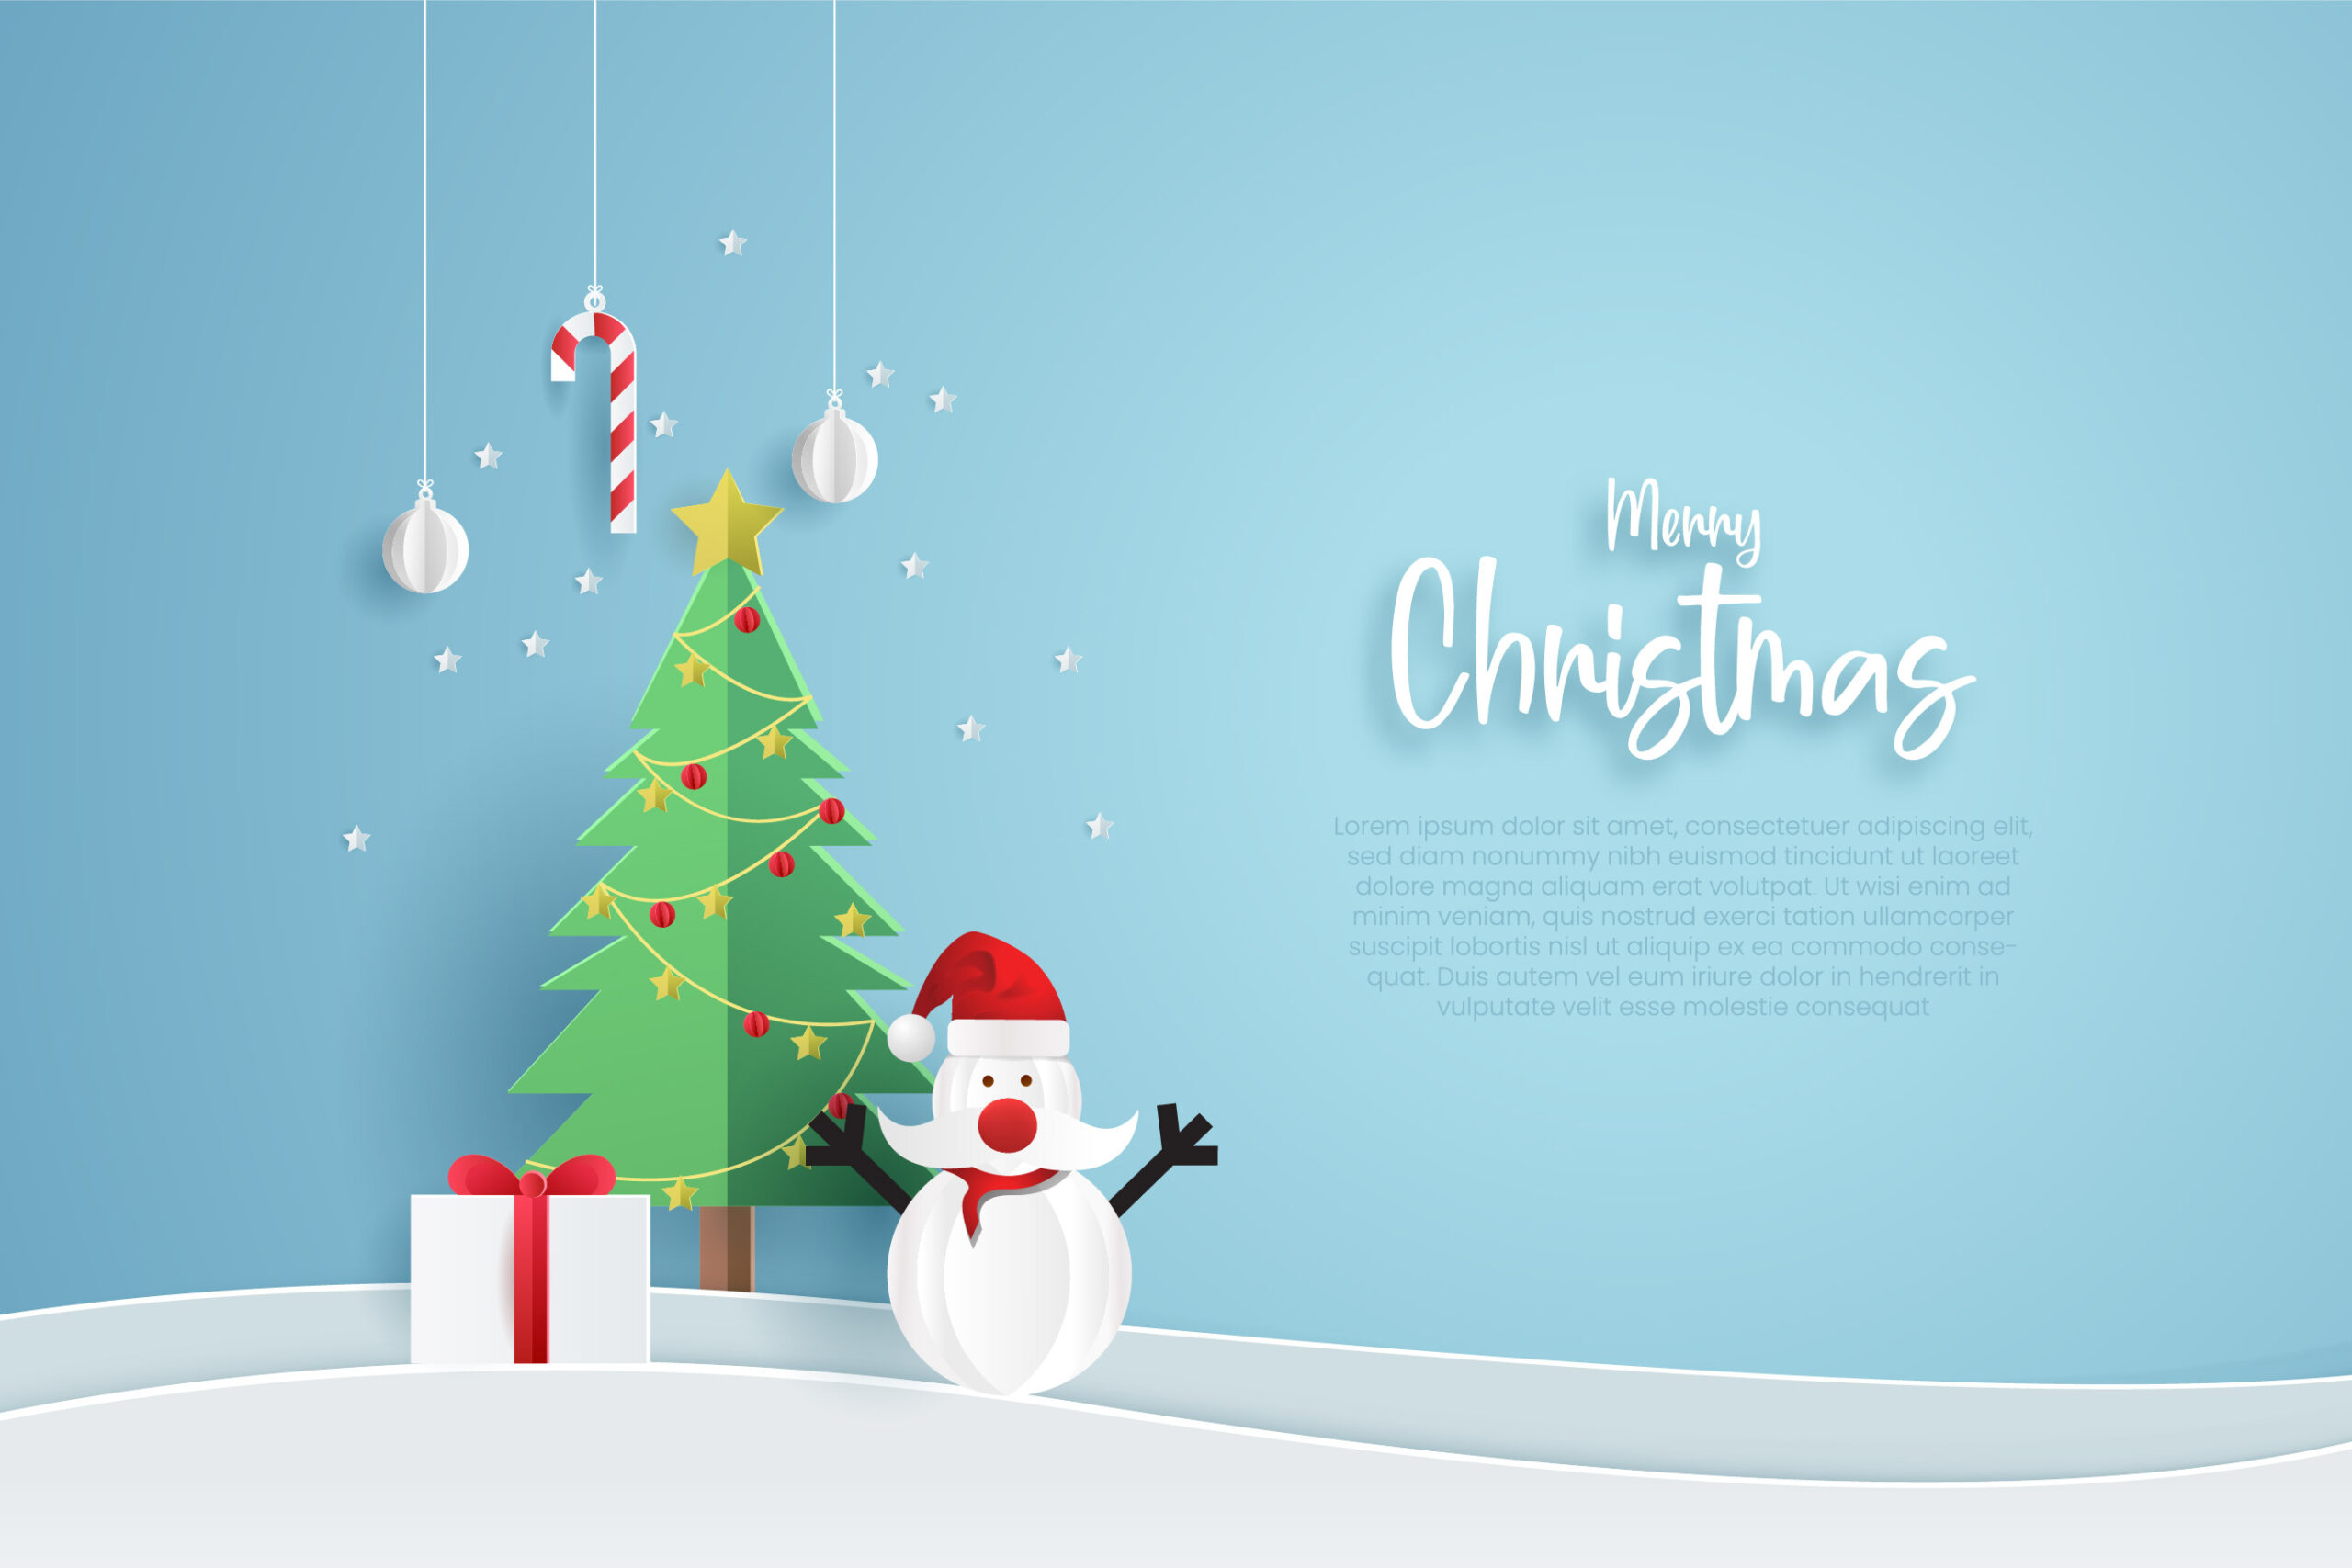 Merry Christmas Banner Template